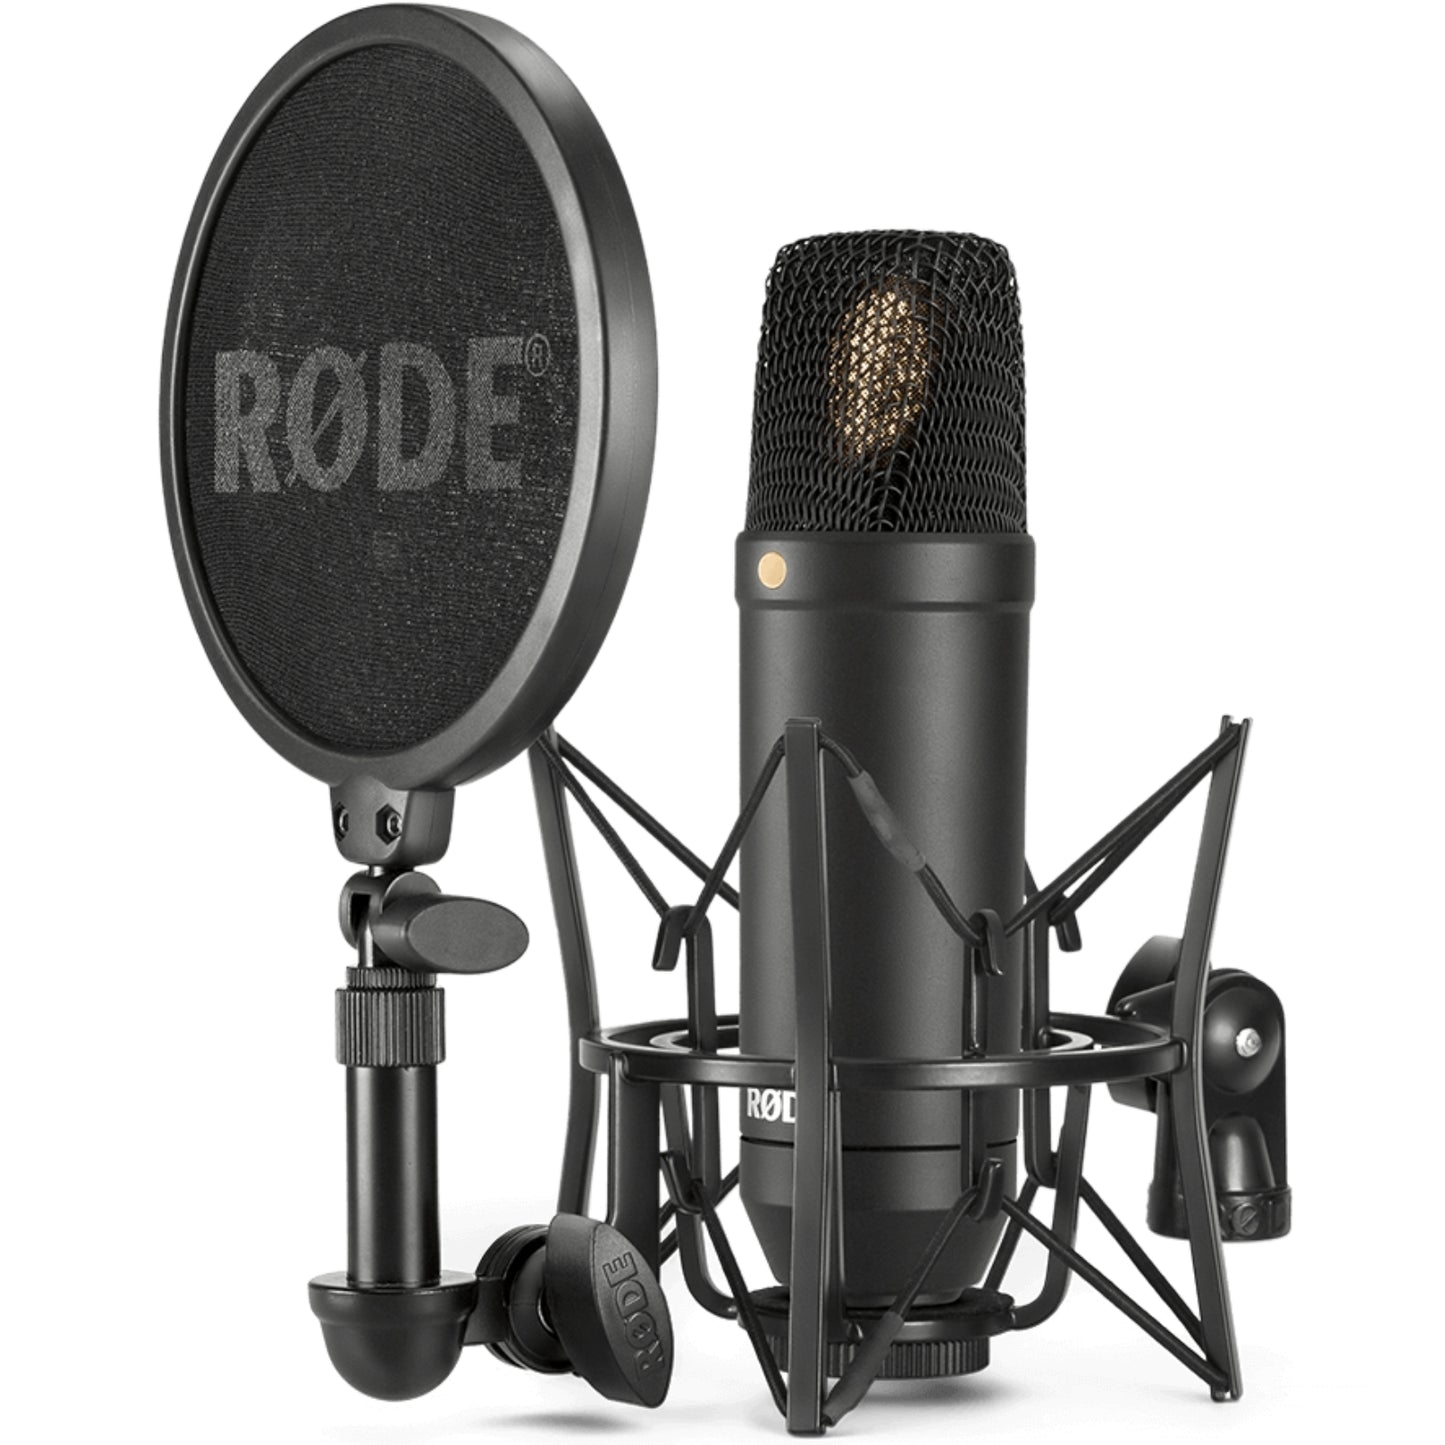 Rode NT1-KIT Cardioid Condenser Microphone